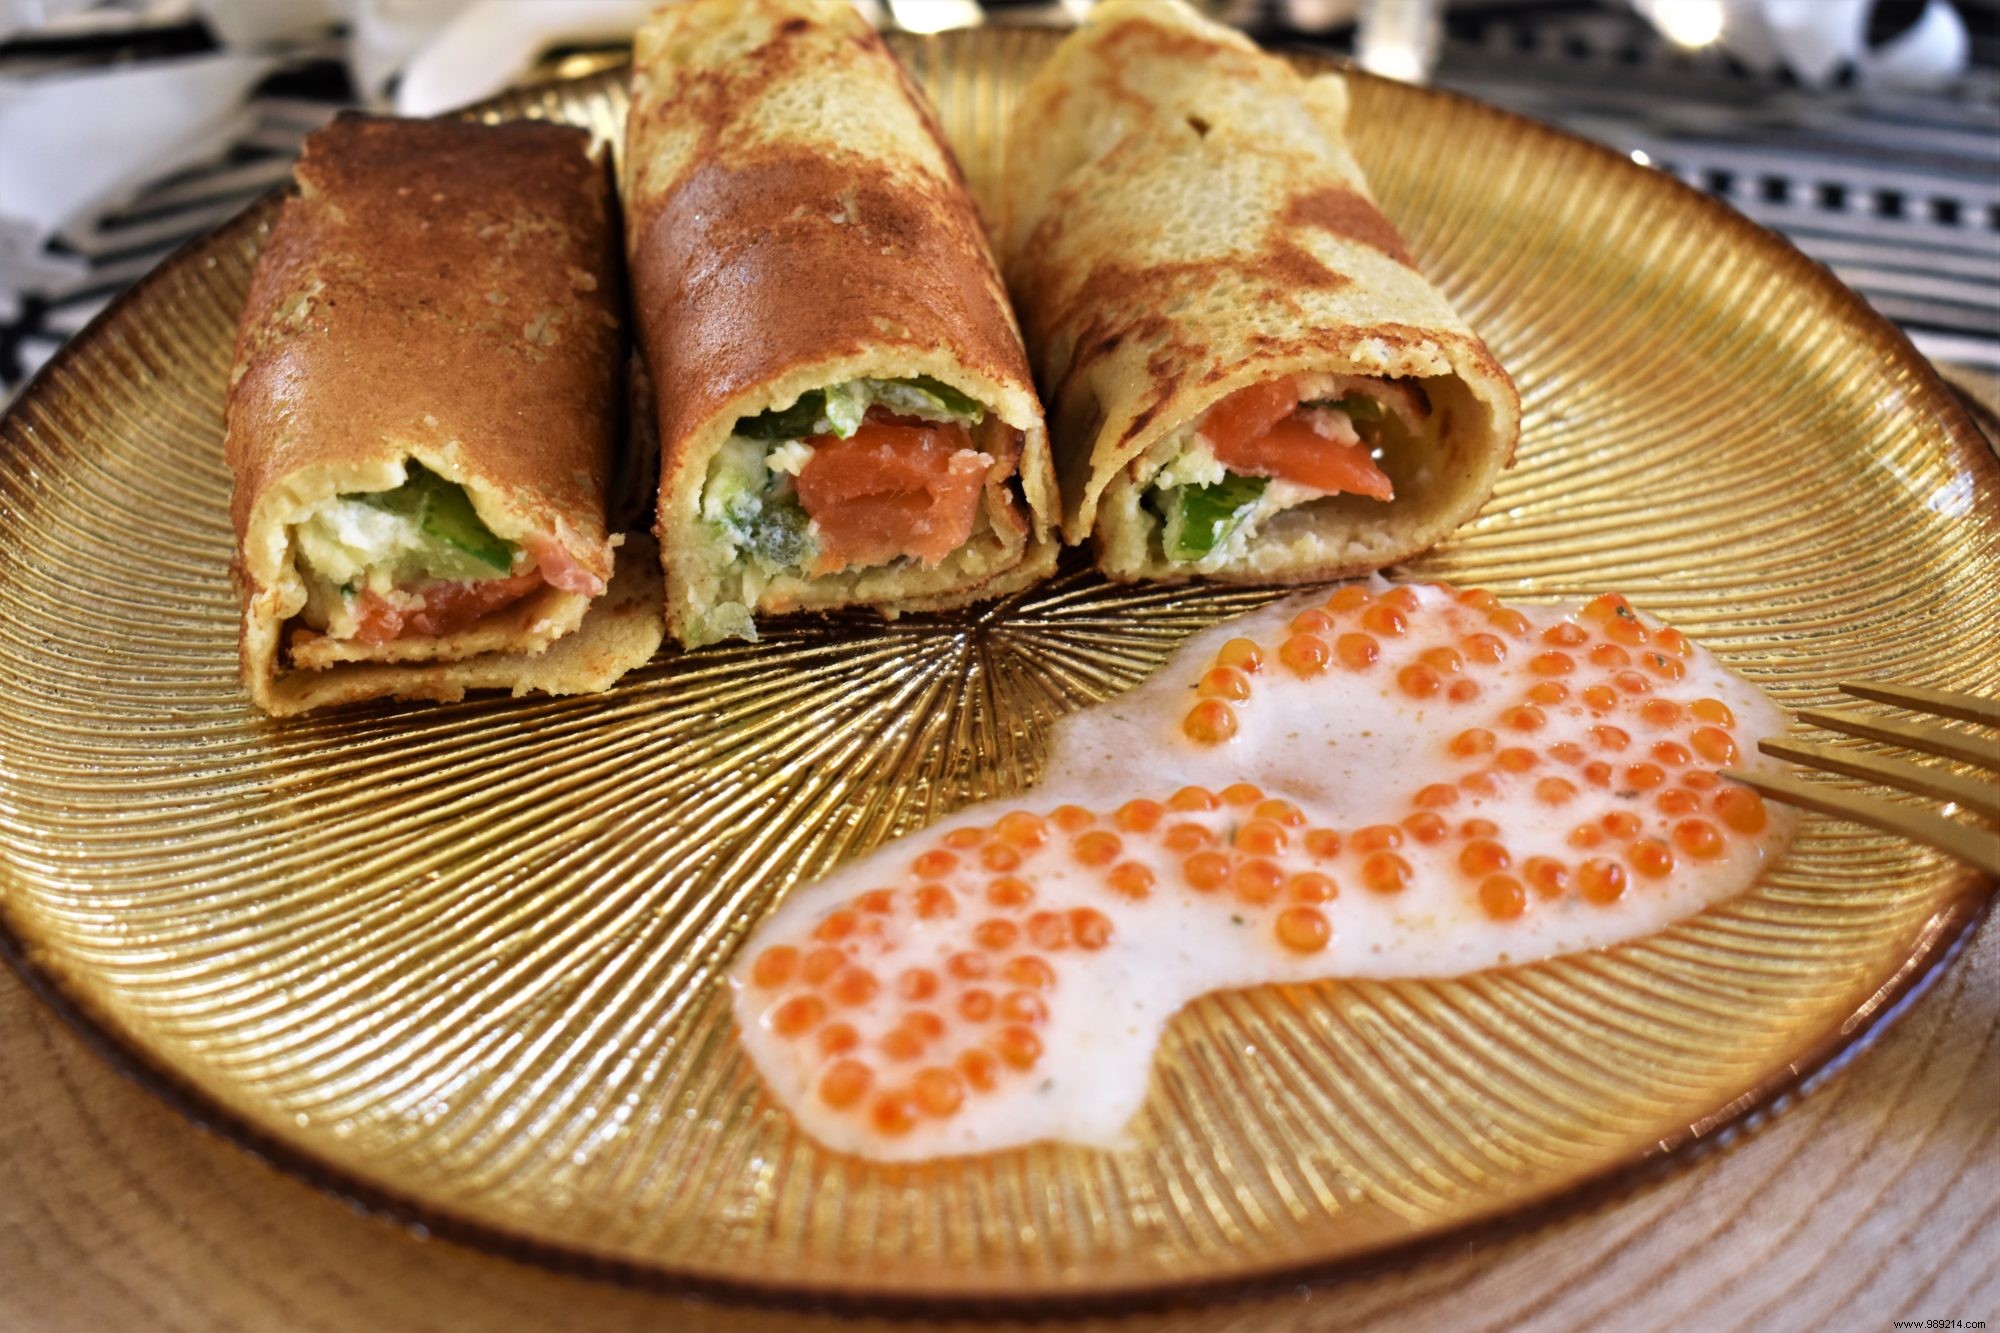 Pancakes rolled with smoked trout (gluten-free &lactose-free) 